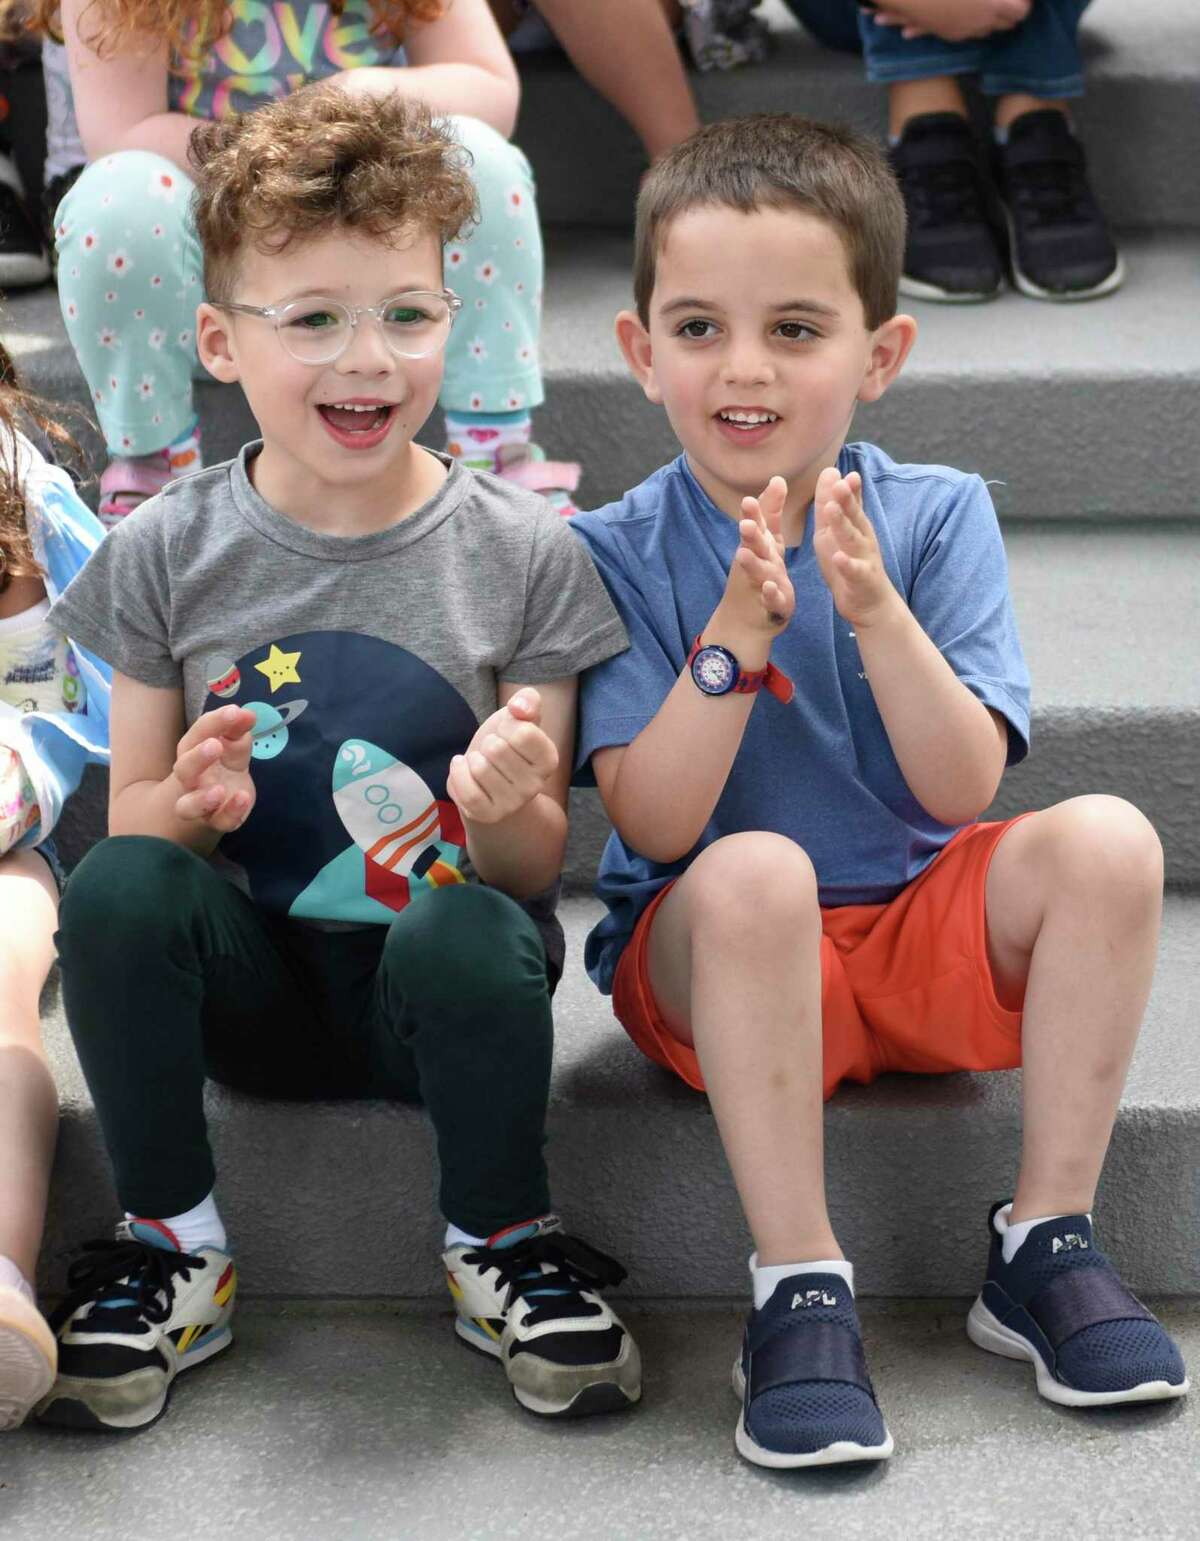 Selma Maisel Nursery School students Miles Tulchin, left, and Hunter Weiss clap during the Starfish Connection backpack donation event at Temple Sholom in Greenwich, Conn.  Thursday, May 26, 2022. 10 backpacks filled with essential materials were collected for the Stamford-based nonprofit Starfish Connection to be given to underserved students in grades five through 10 for an upcoming trip to High Rock Camp in the Berkshires.  Starfish Connection is an all-volunteer organization that seeks to close Stamford's academic achievement gap through mentoring, enrichment programs, and educational support.